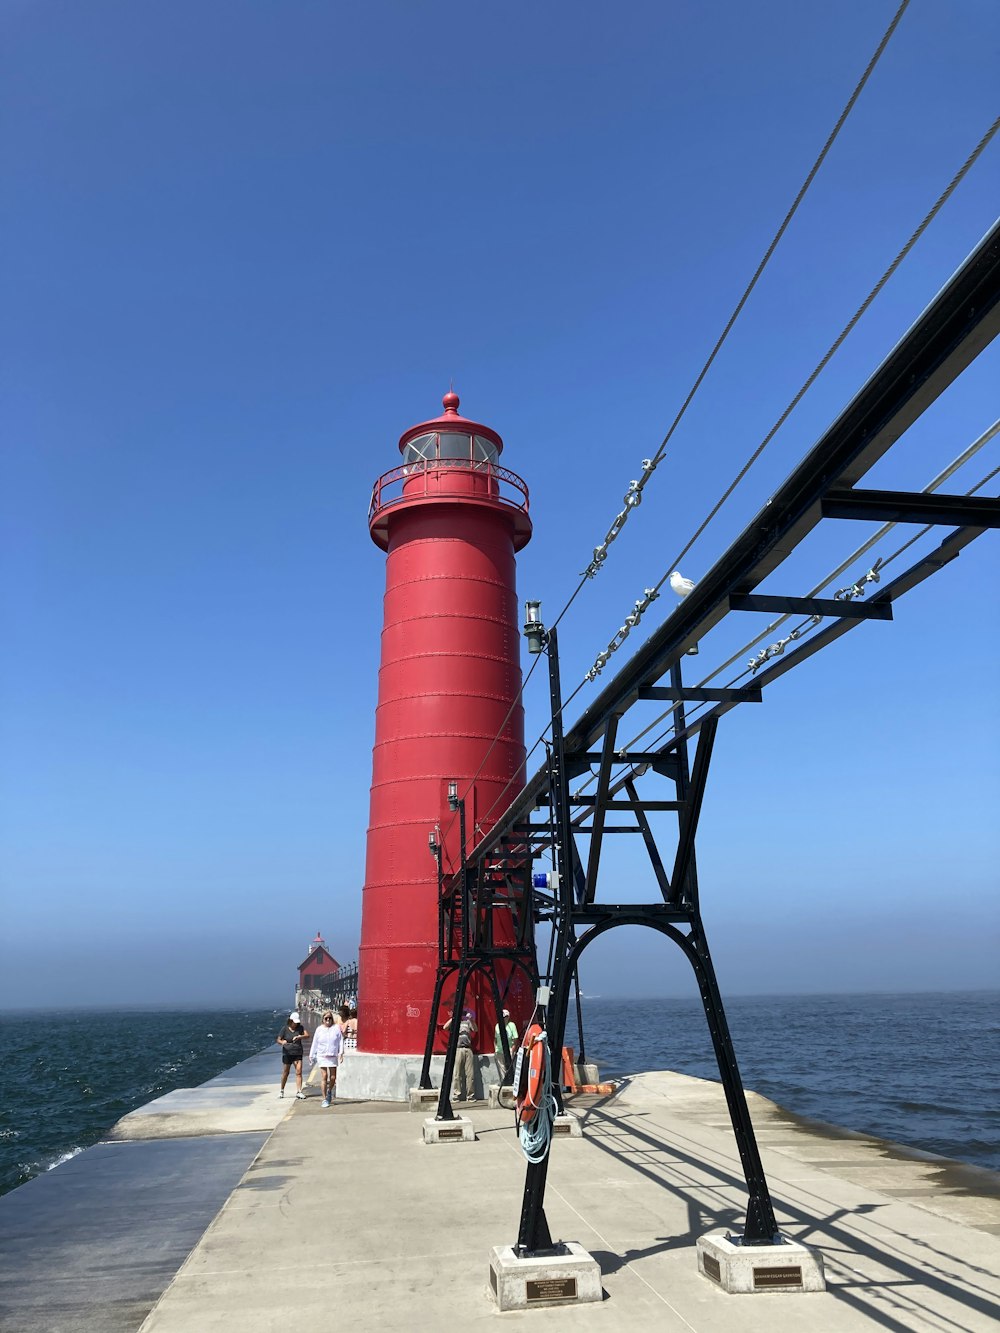 red and white lighthouse near body of water during daytime